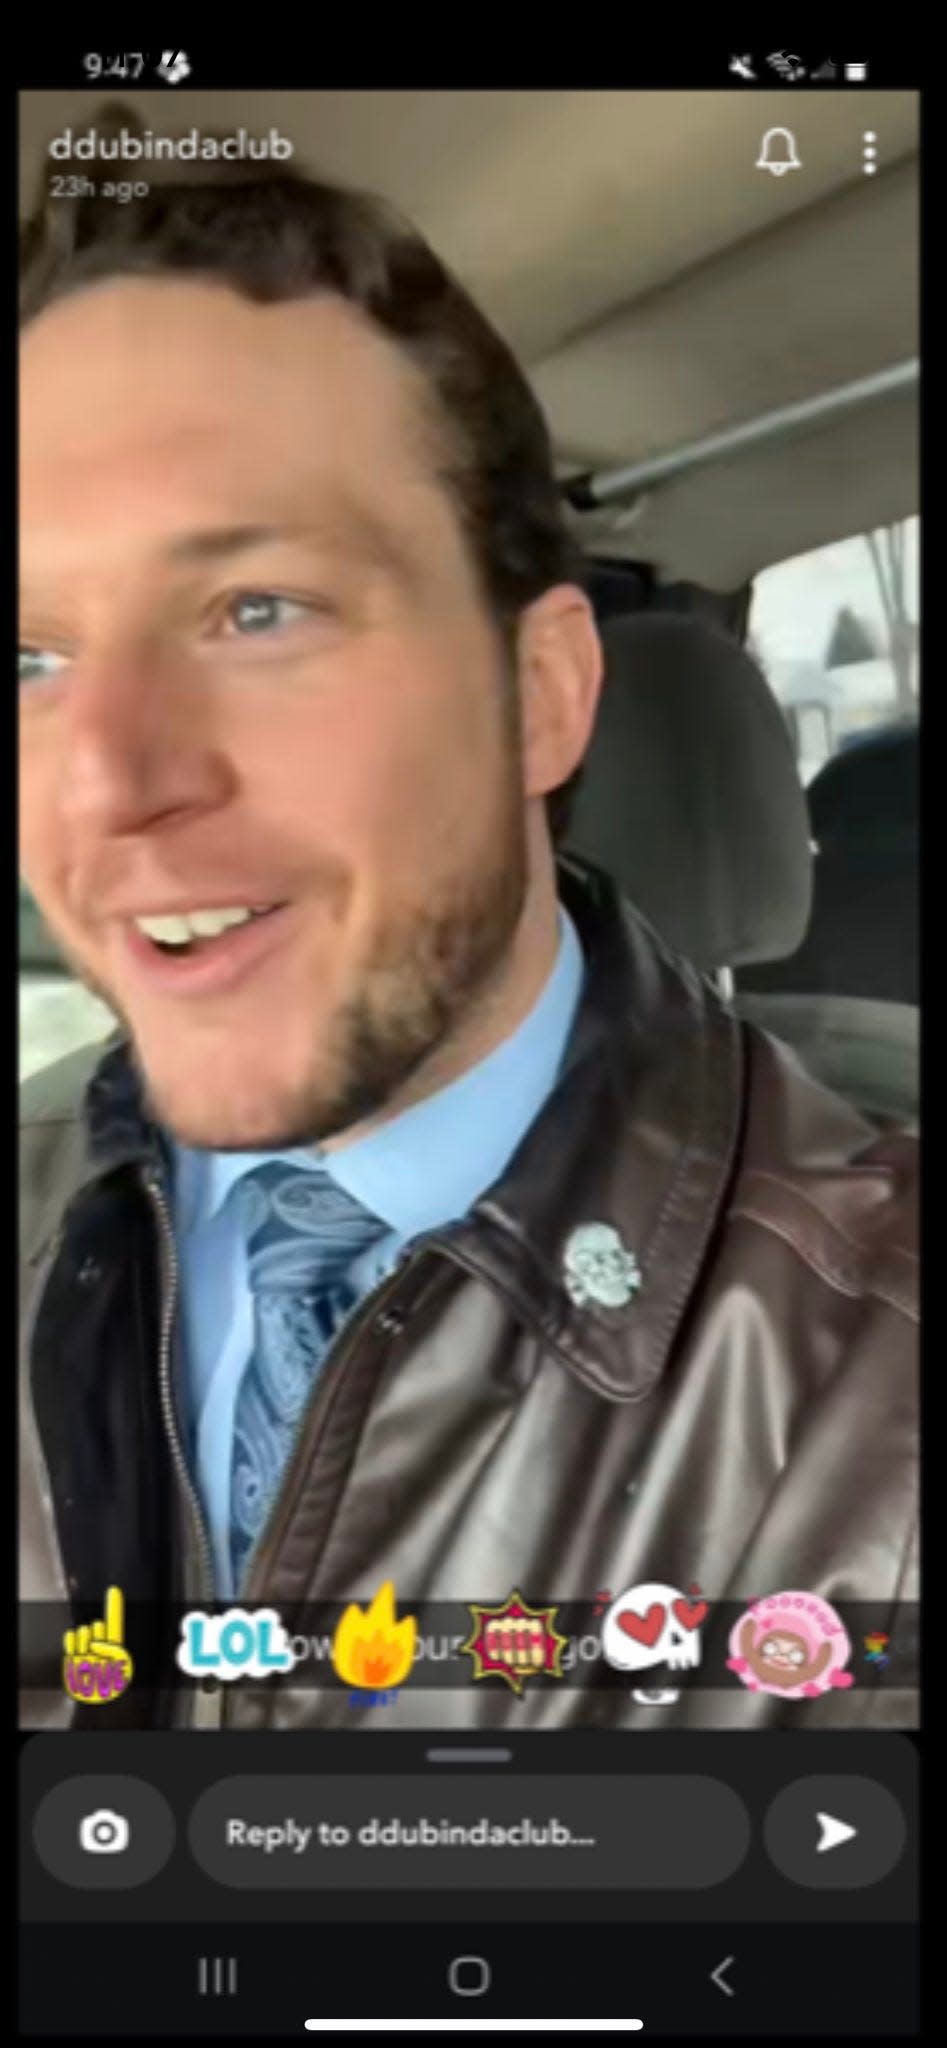 A video of Daren Wiseley, a Hillsdale attorney, reportedly shared to his Snapchat, shows him wearing what appears to be a Totenkopf lapel pin, a symbol of the Nazi Schutzstaffel (most commonly referred to as the SS).